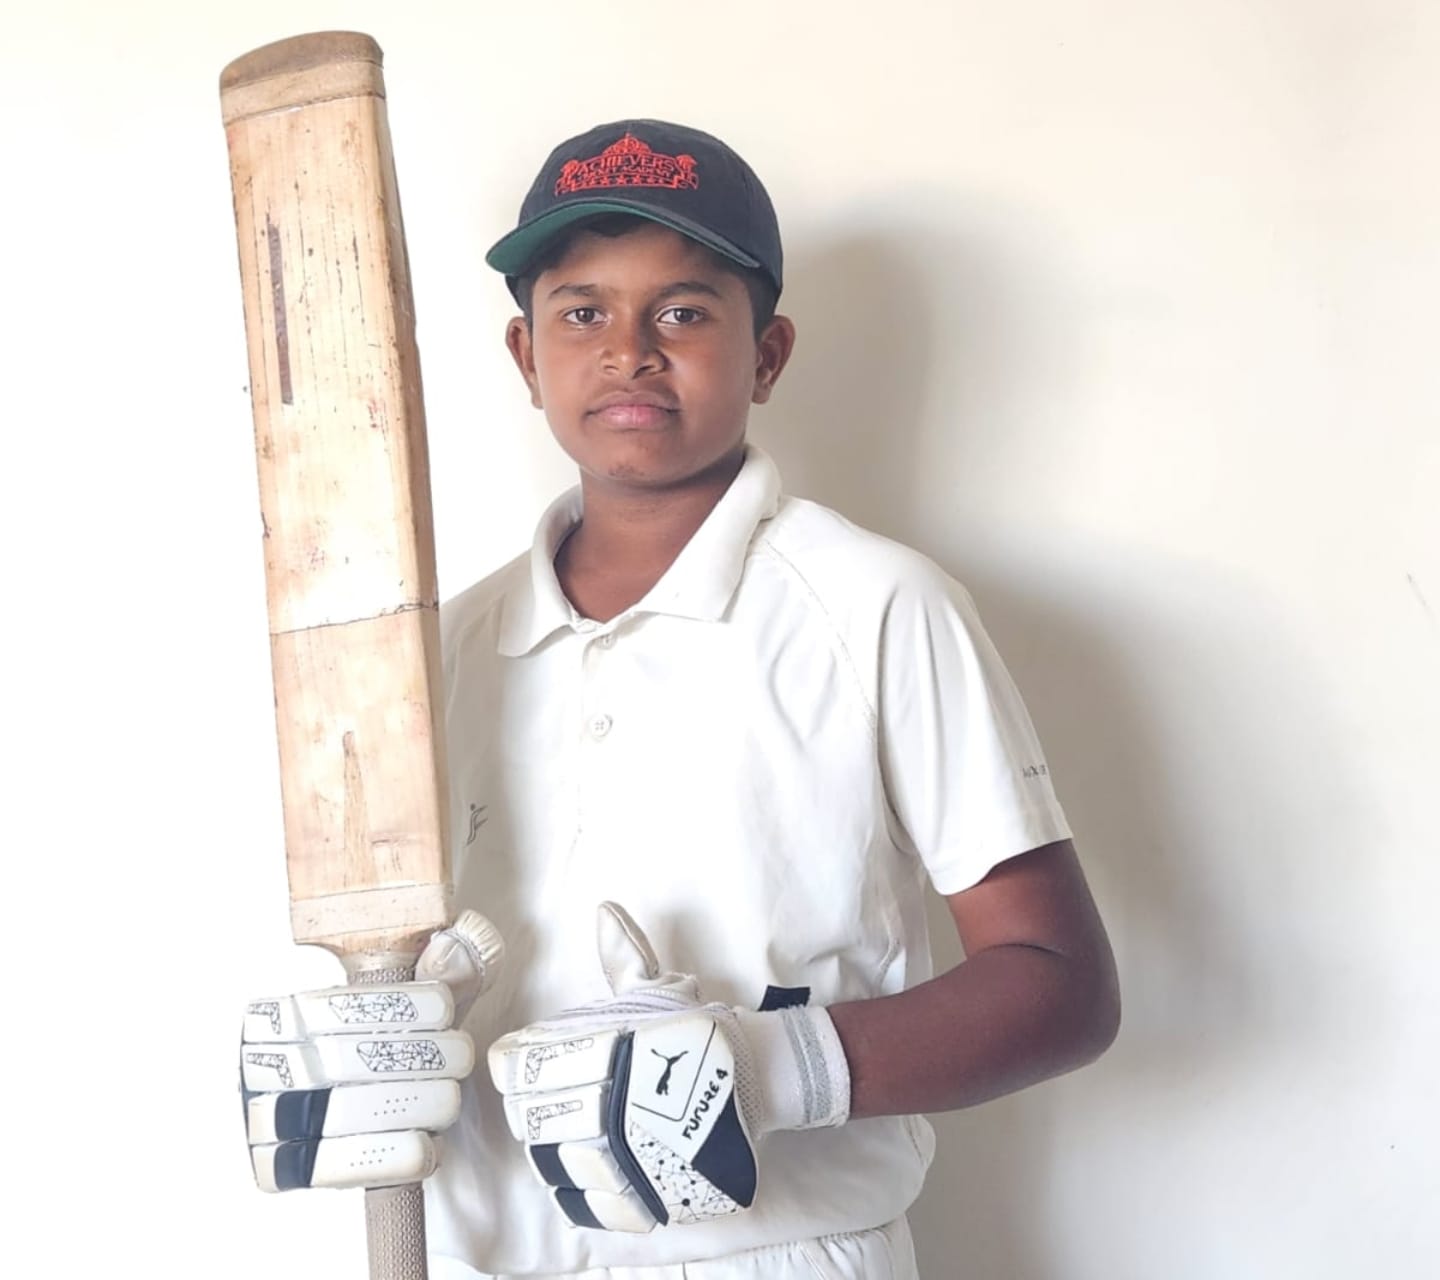 Dhairya Patil from Achievers Cricket Academy